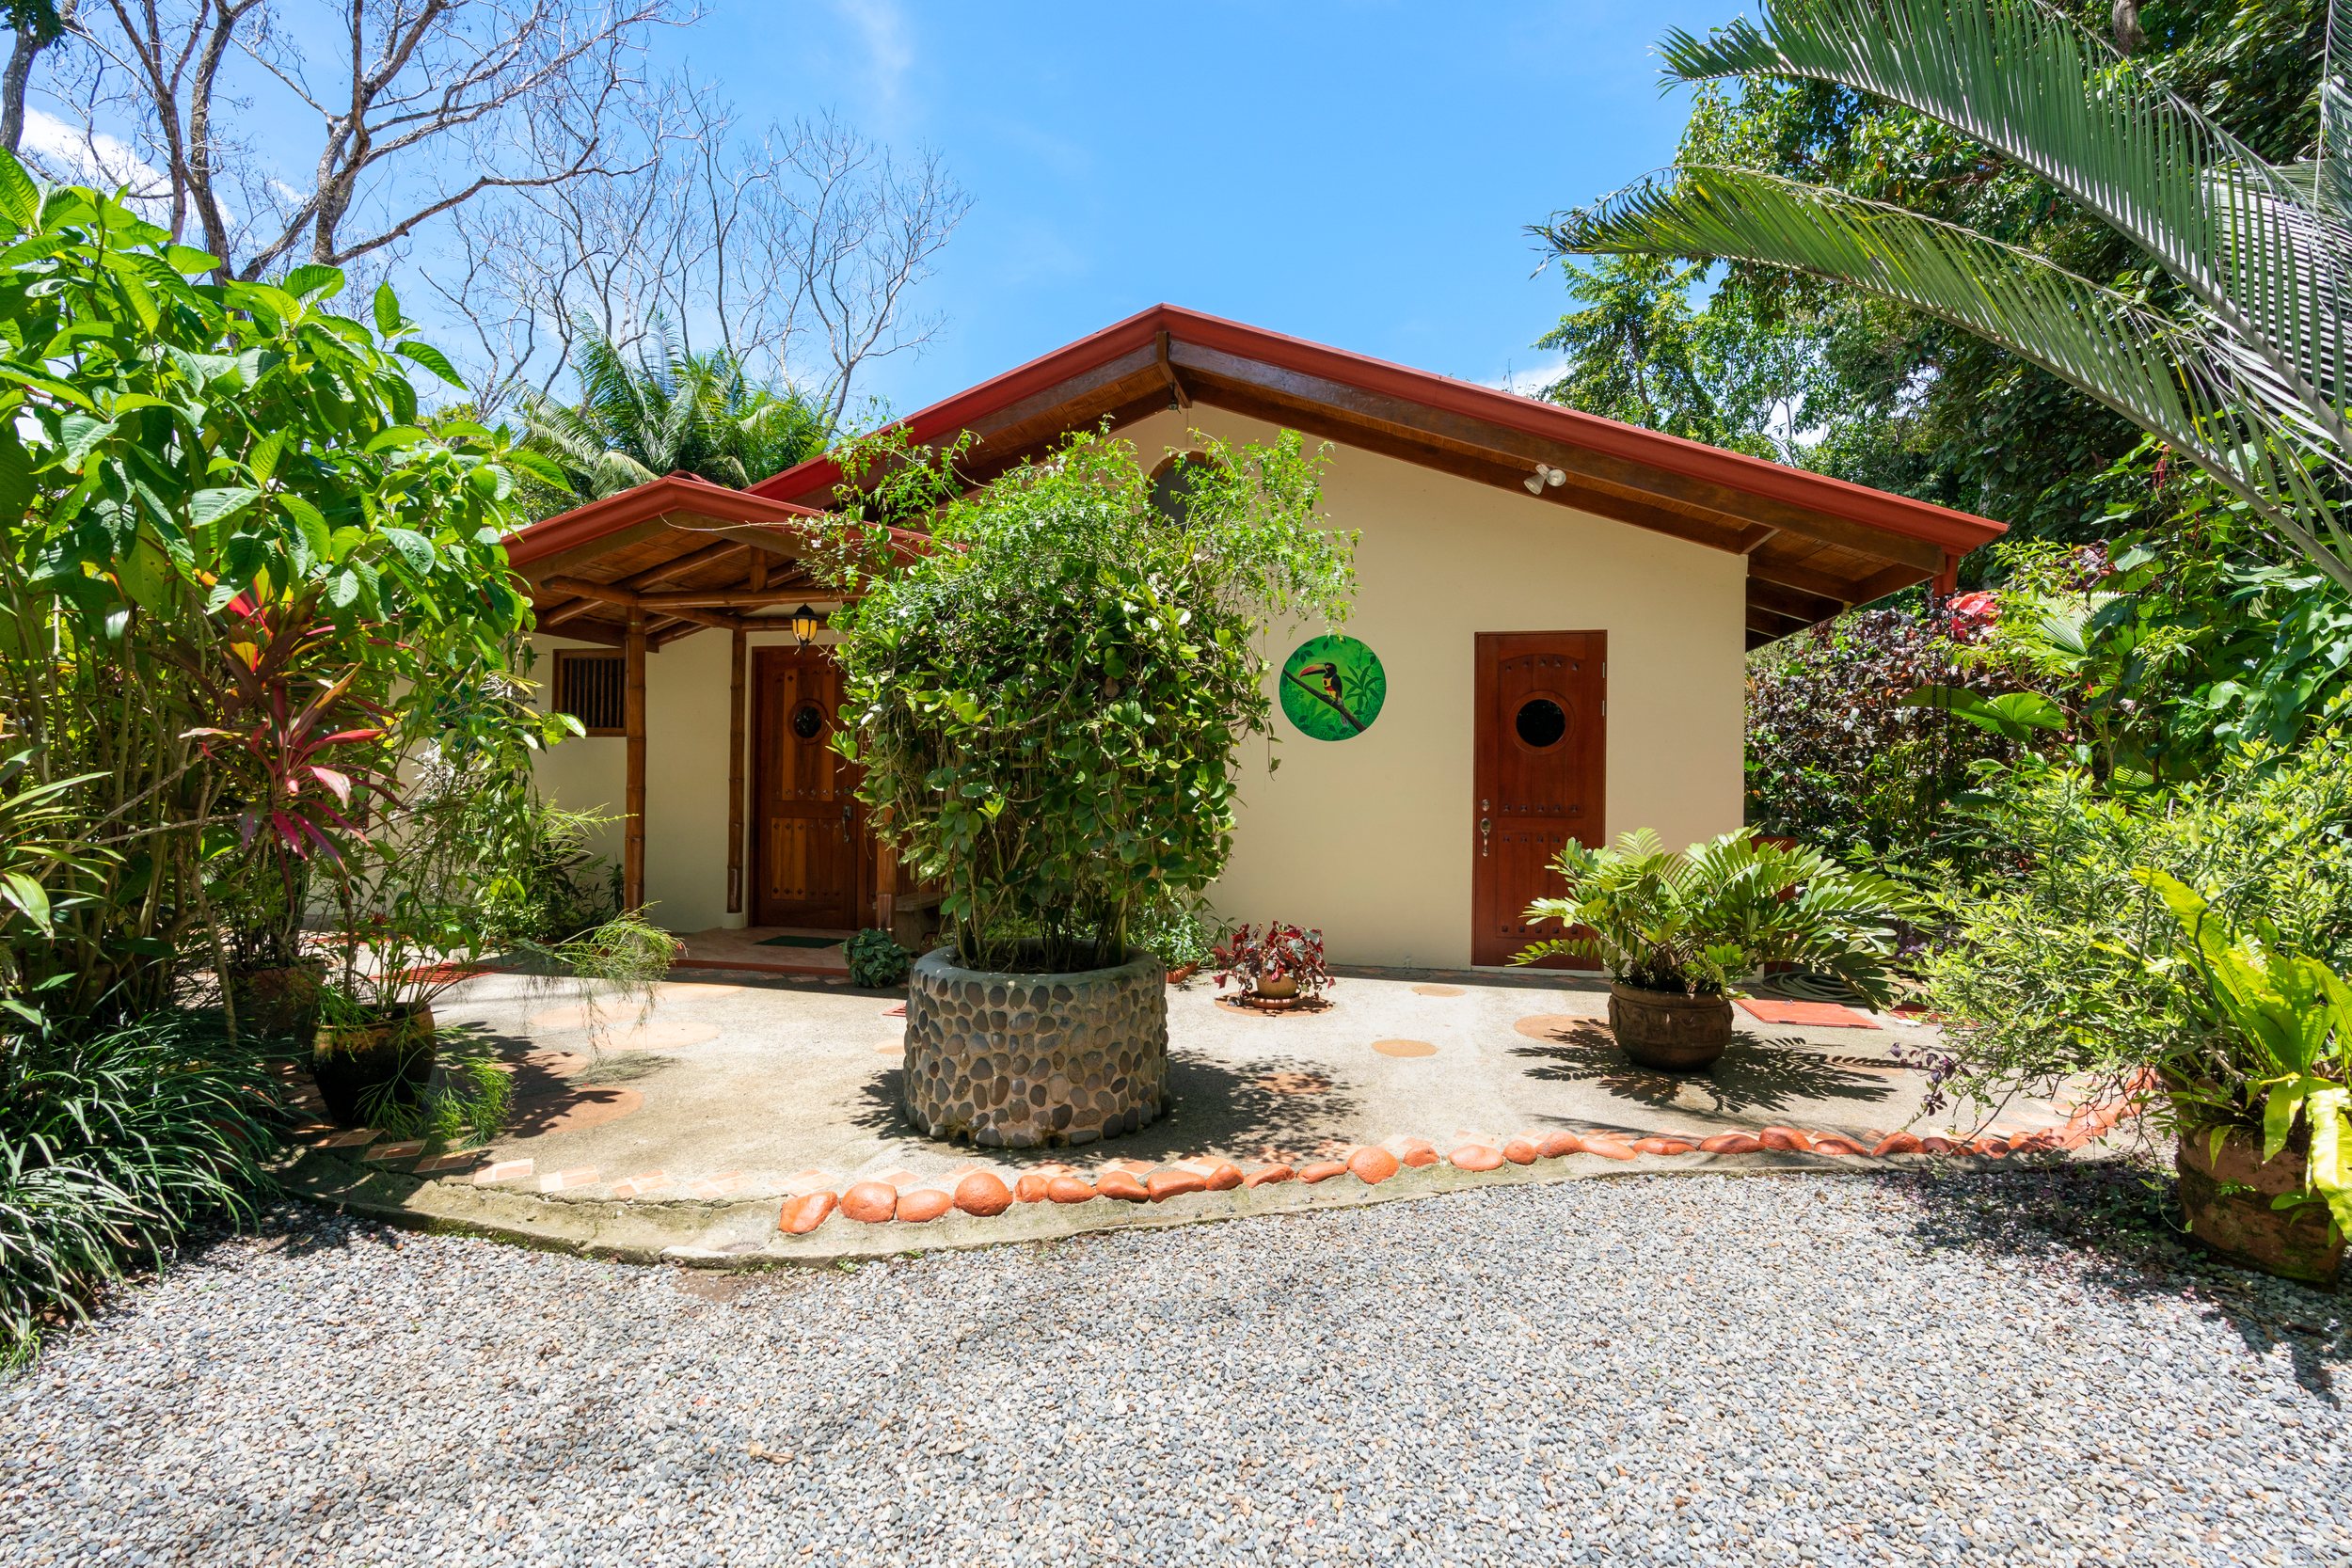 vrbo_airbnb_vacation_home_photography_costarica-001.JPG